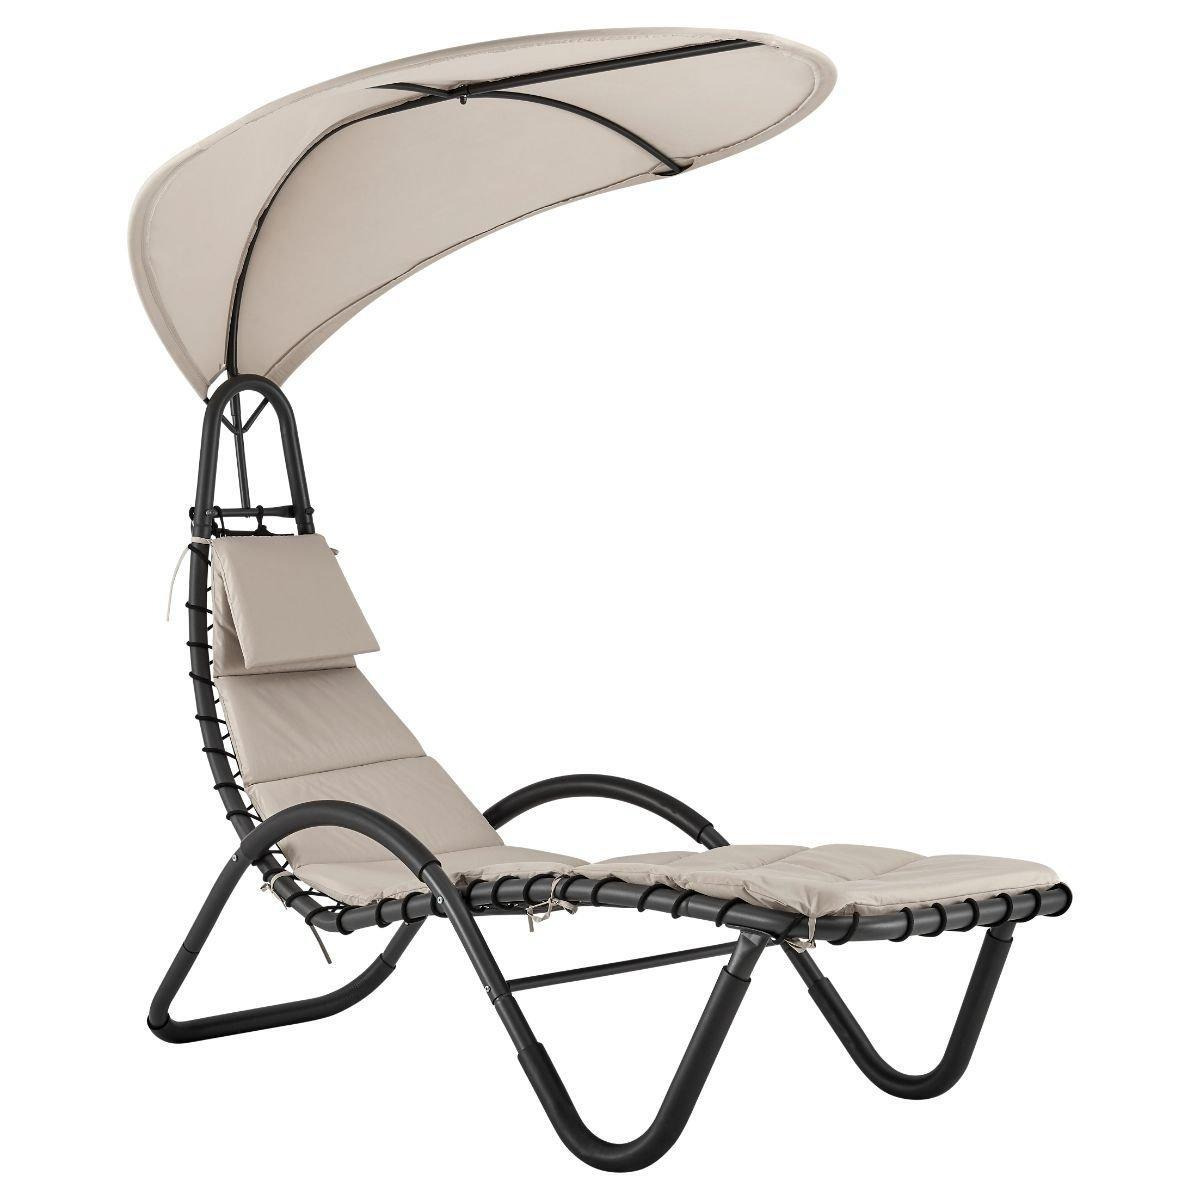 Bali Sun Lounger Relaxing Chair with Canopy Shade and Padded Cushions - image 1